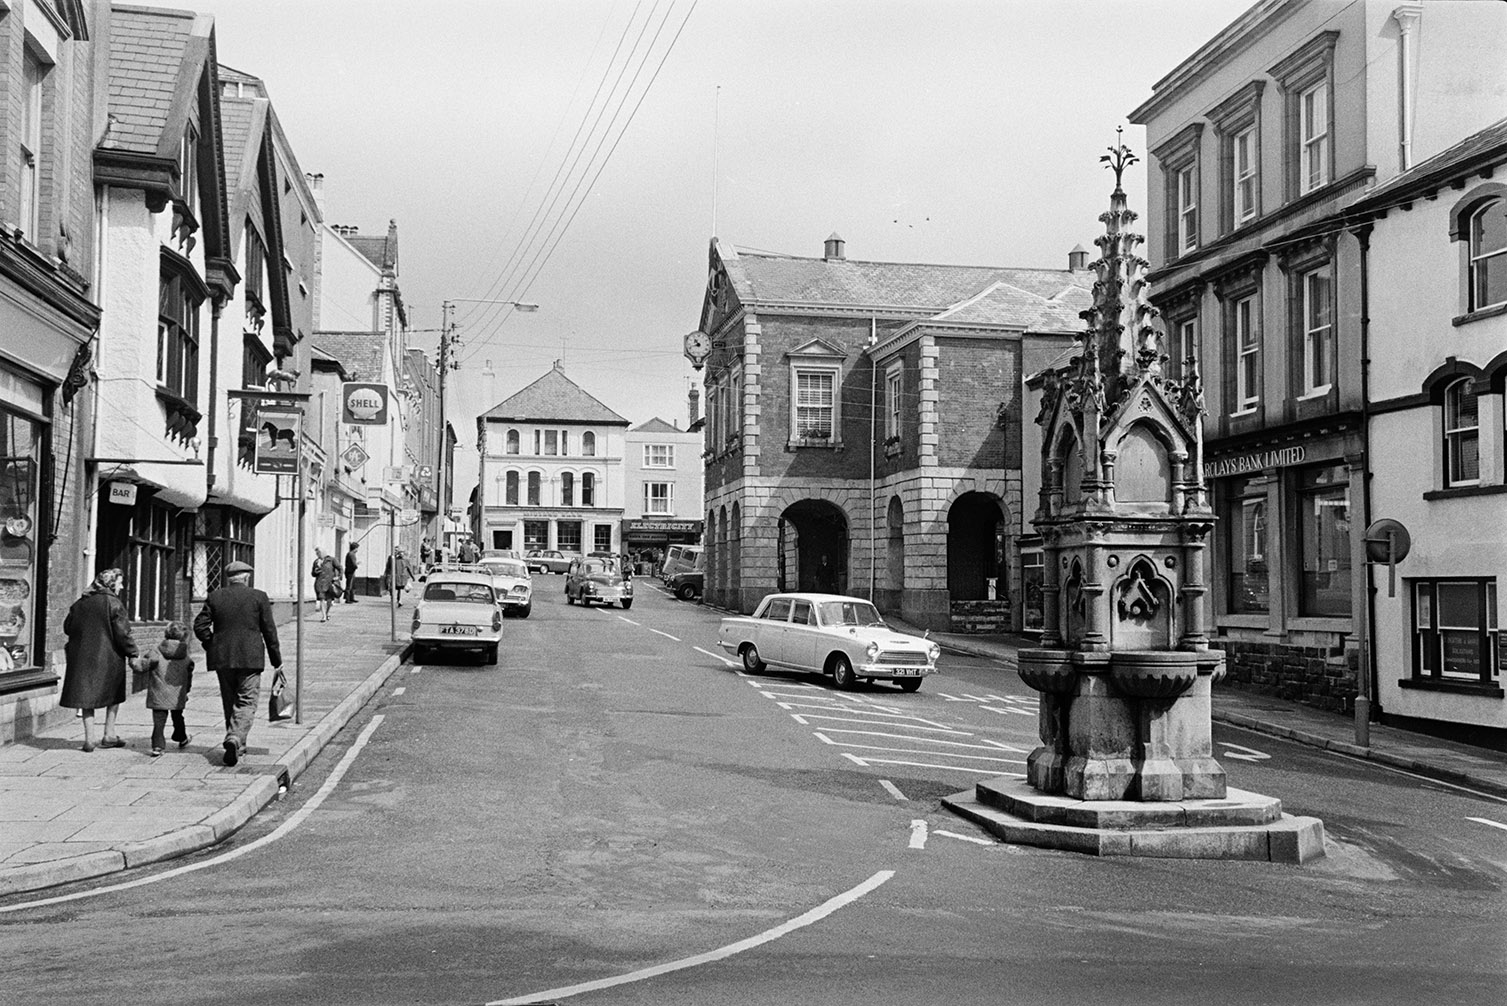 Street with shop fronts, parked cars and a water pump in Torrington. Shoppers are walking along the street and the Town Hall can be seen on the right with arches.